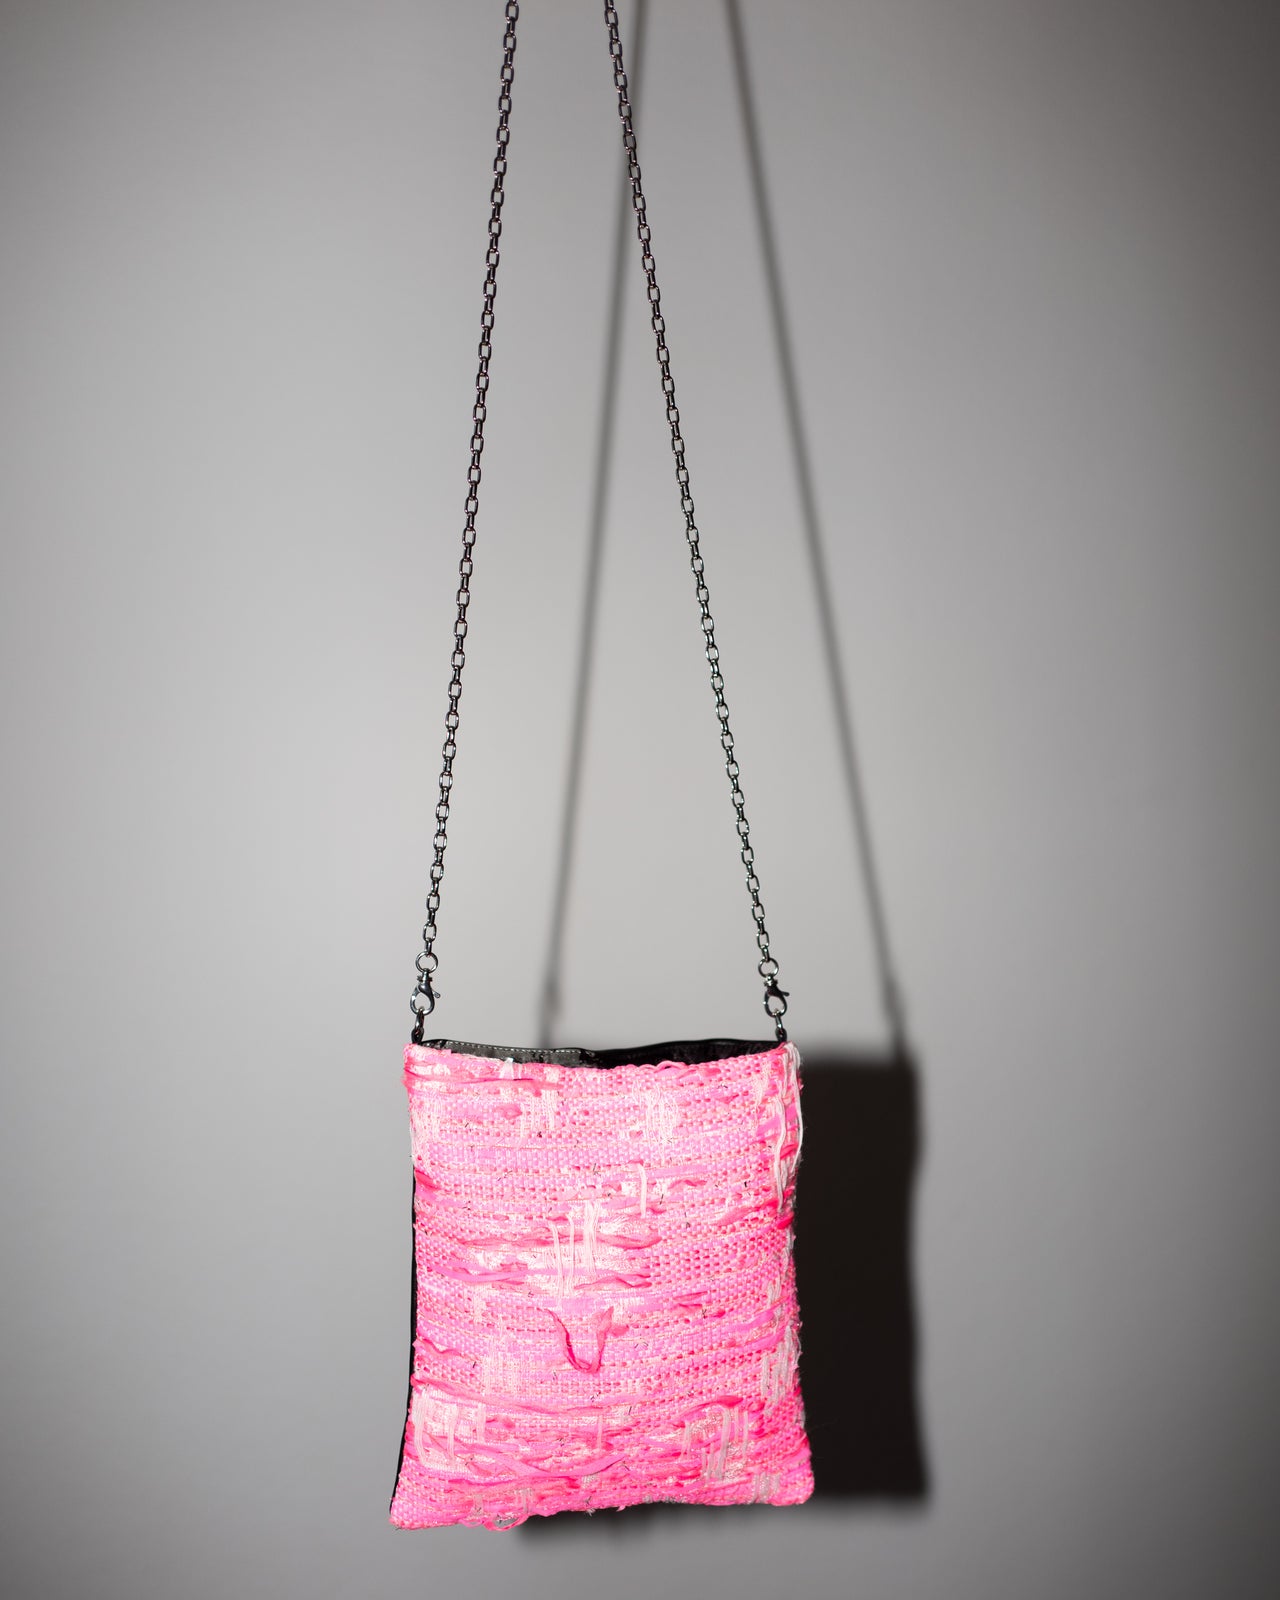 Bag with Neon Pink Tweed and Black Leather Silver Chain